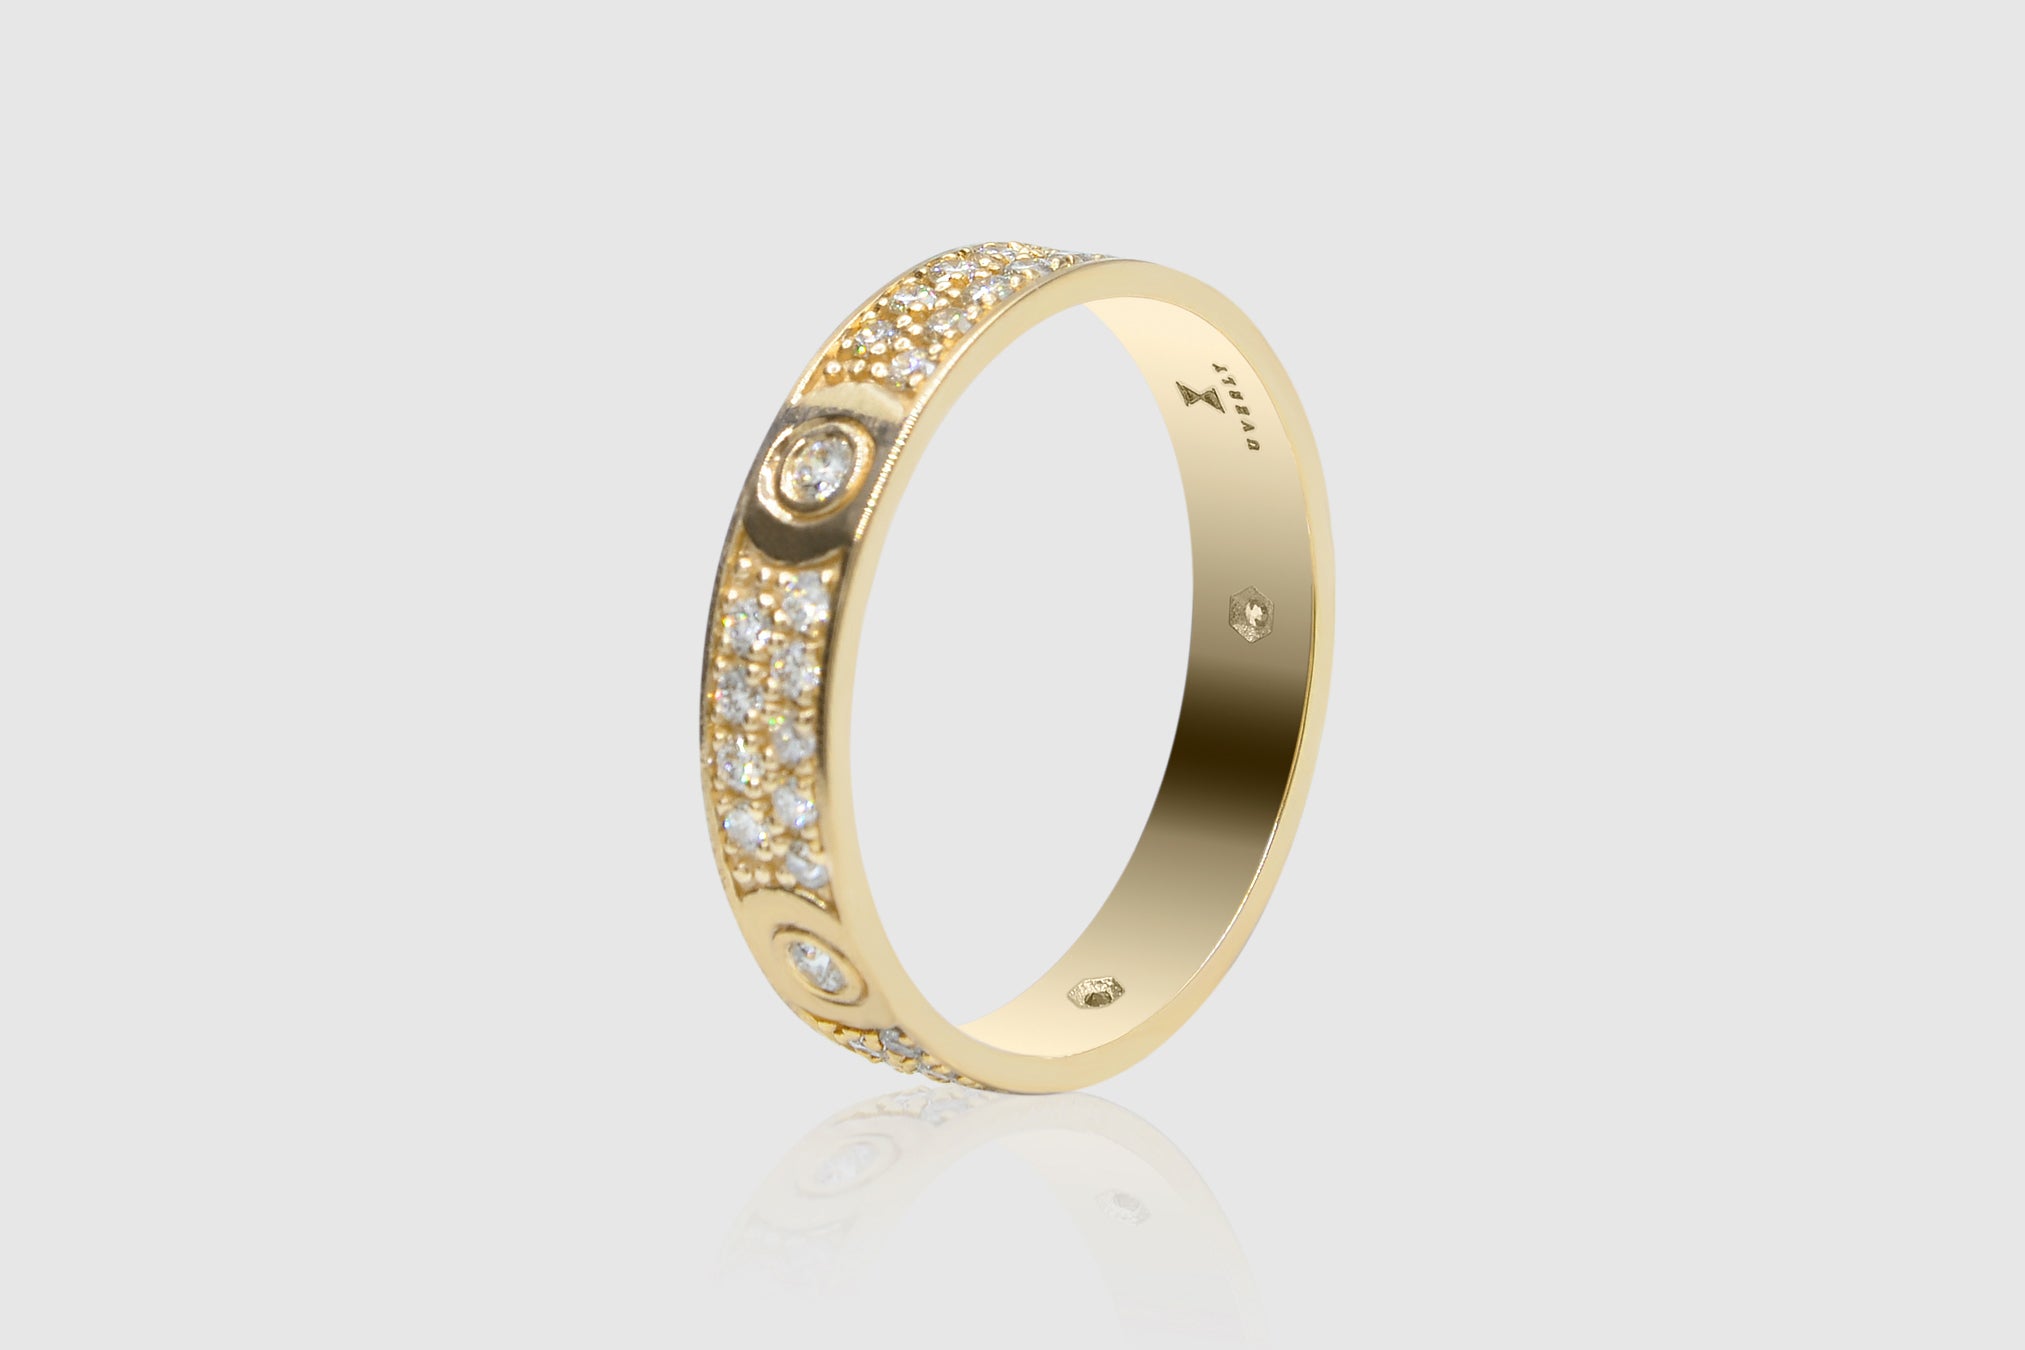 The Sound Of Love Band For Her | BlueStone.com